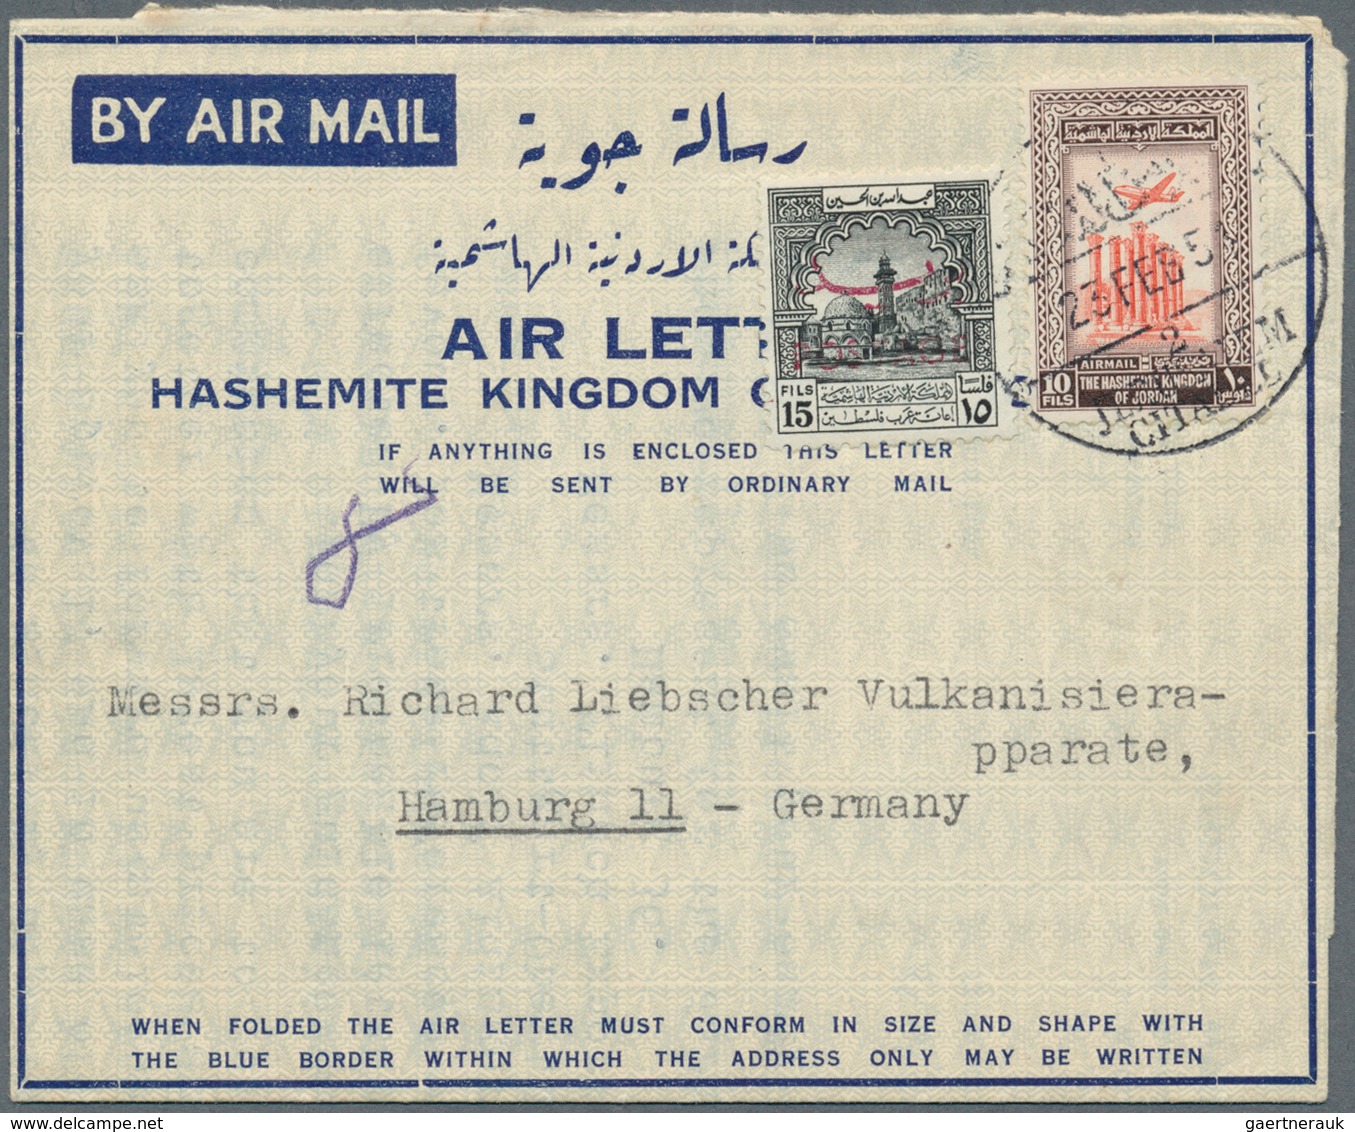 Jordanien: 1948 - 1979, 37 Covers, Nice Collection Of Covers And Some Postal Stationery, Good Franki - Jordanie